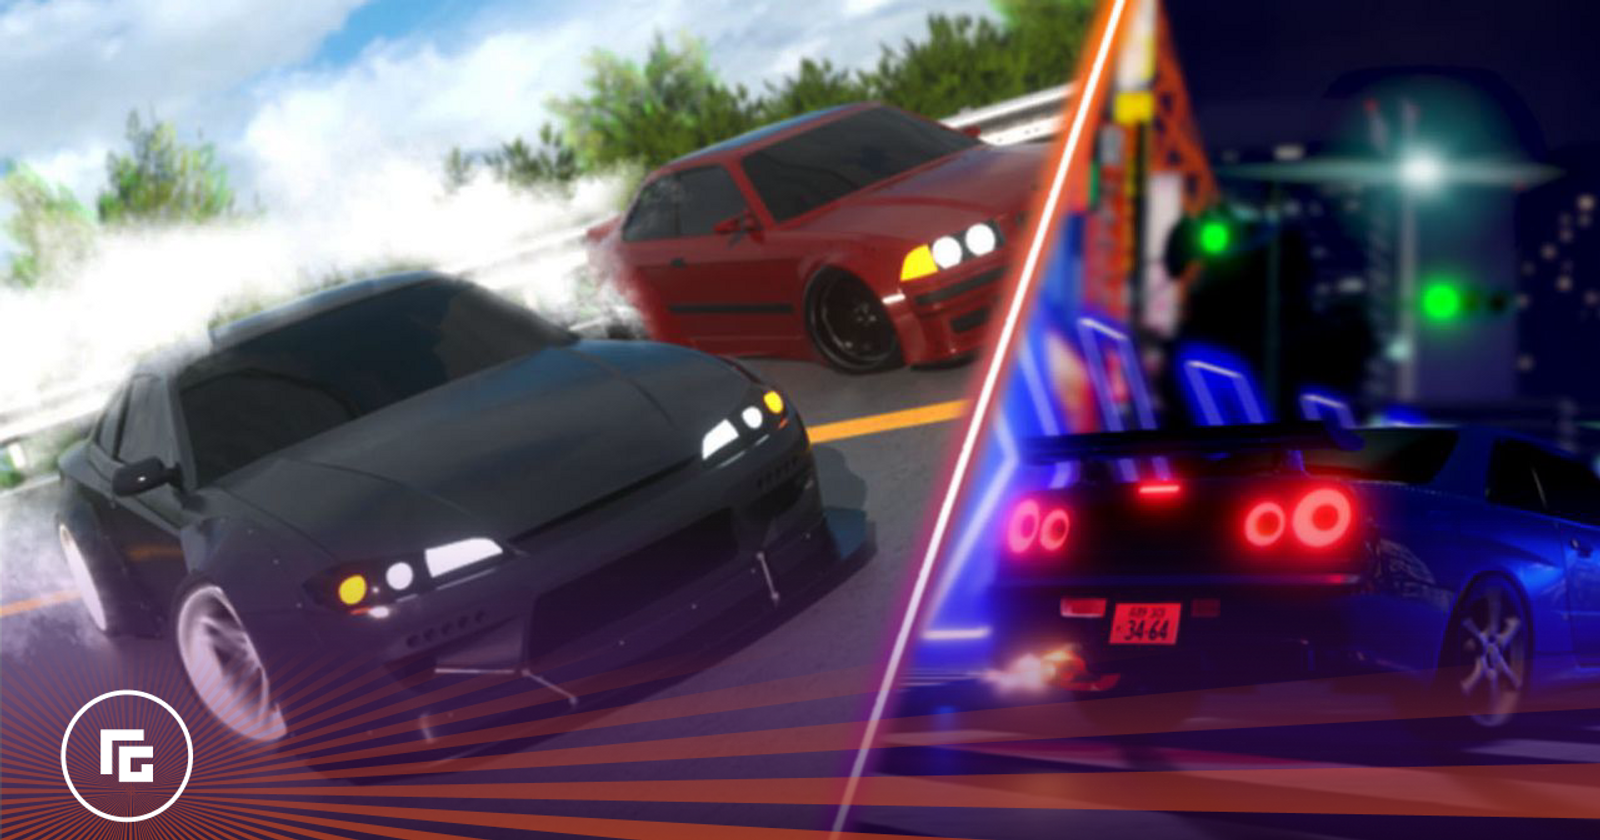 Playing the BEST DRIFTING game on Roblox!! (Roblox Tokyo Drift